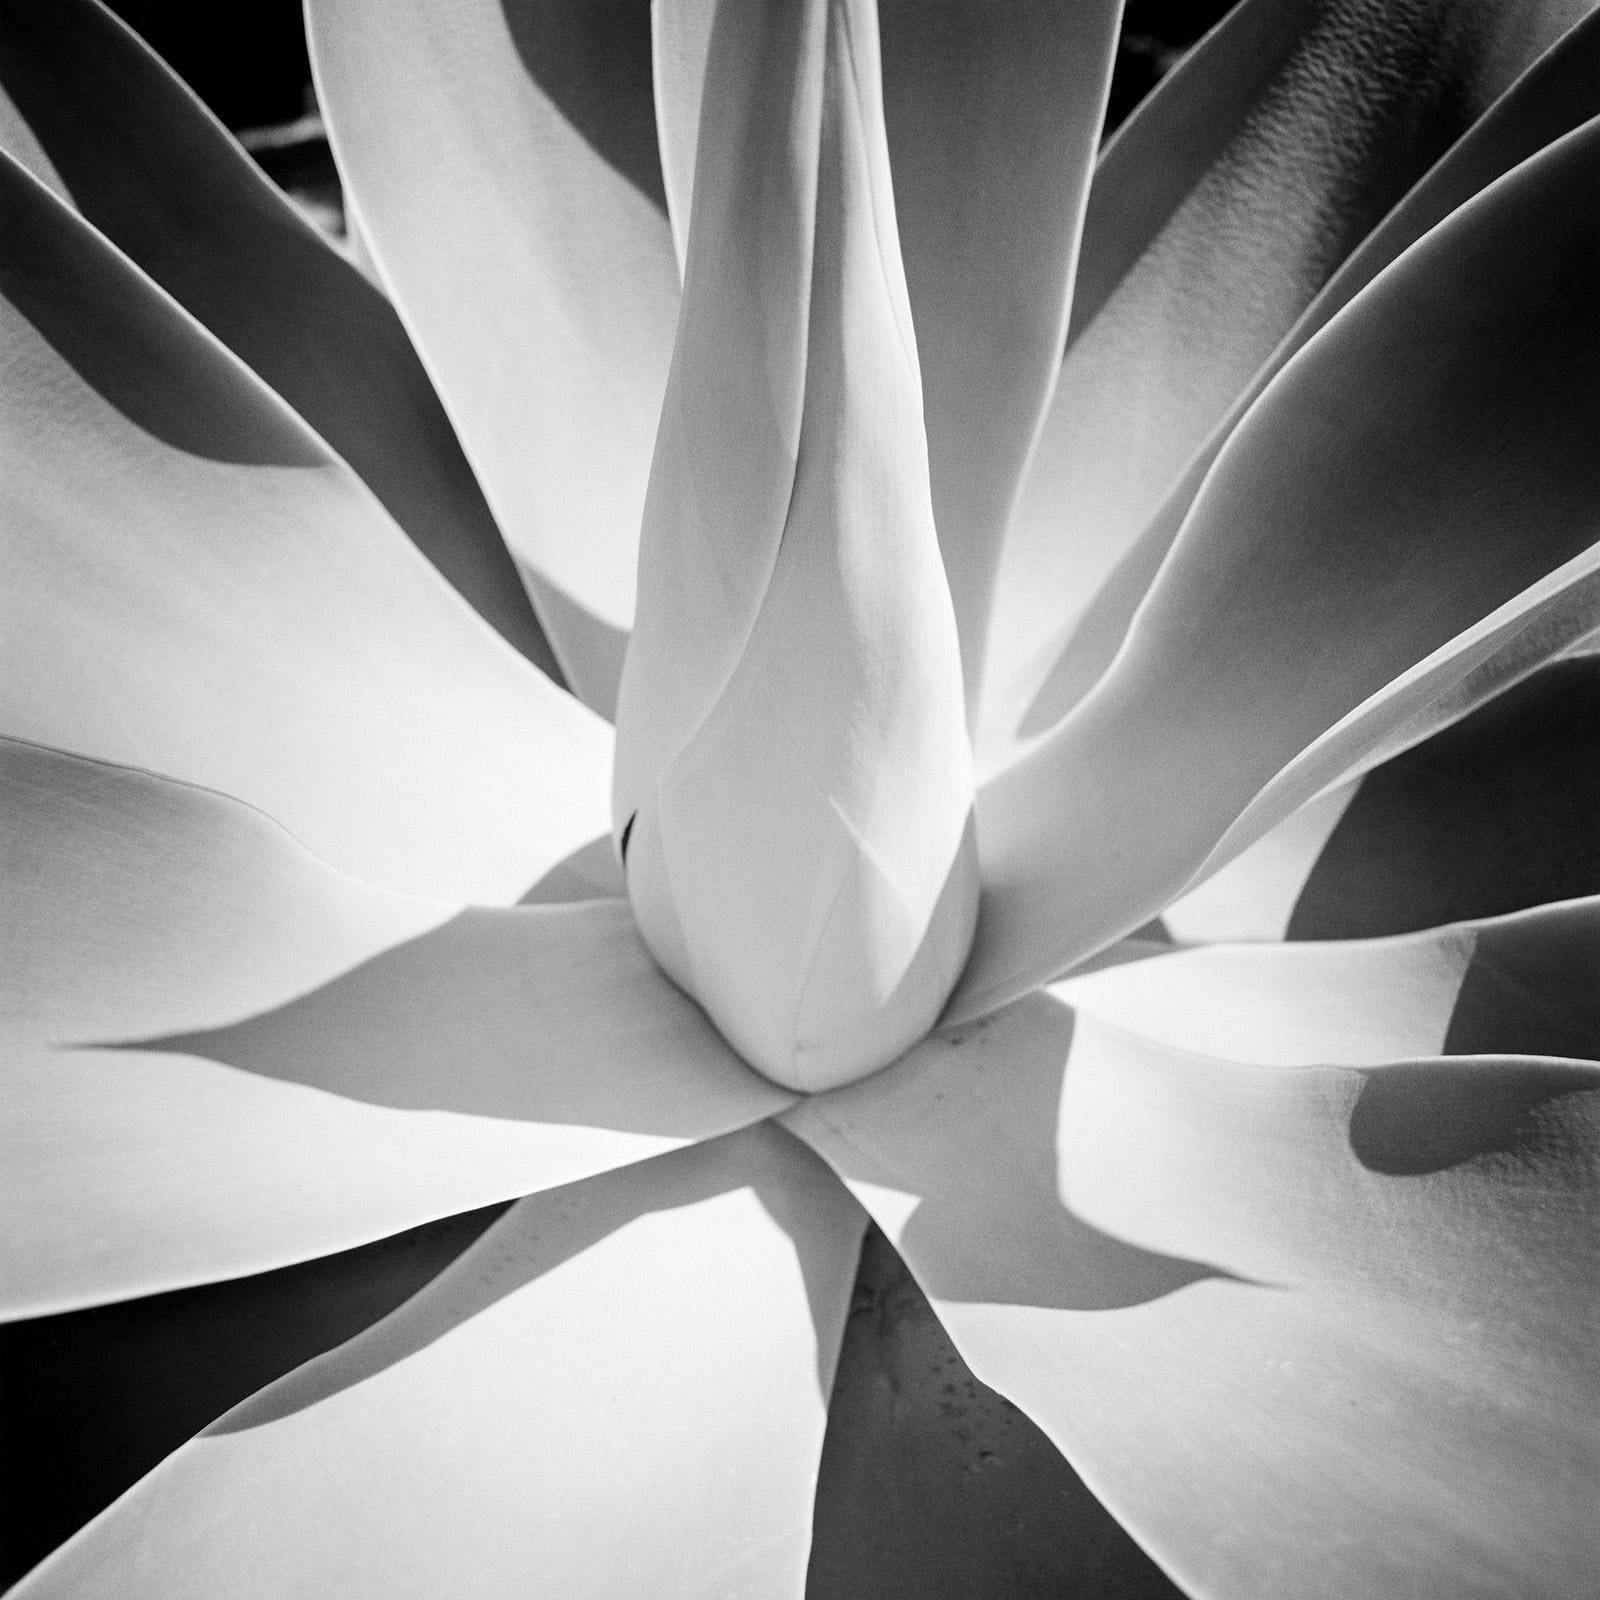 Blue Agave, Arizona, USA, abstract black and white art photography, landscape